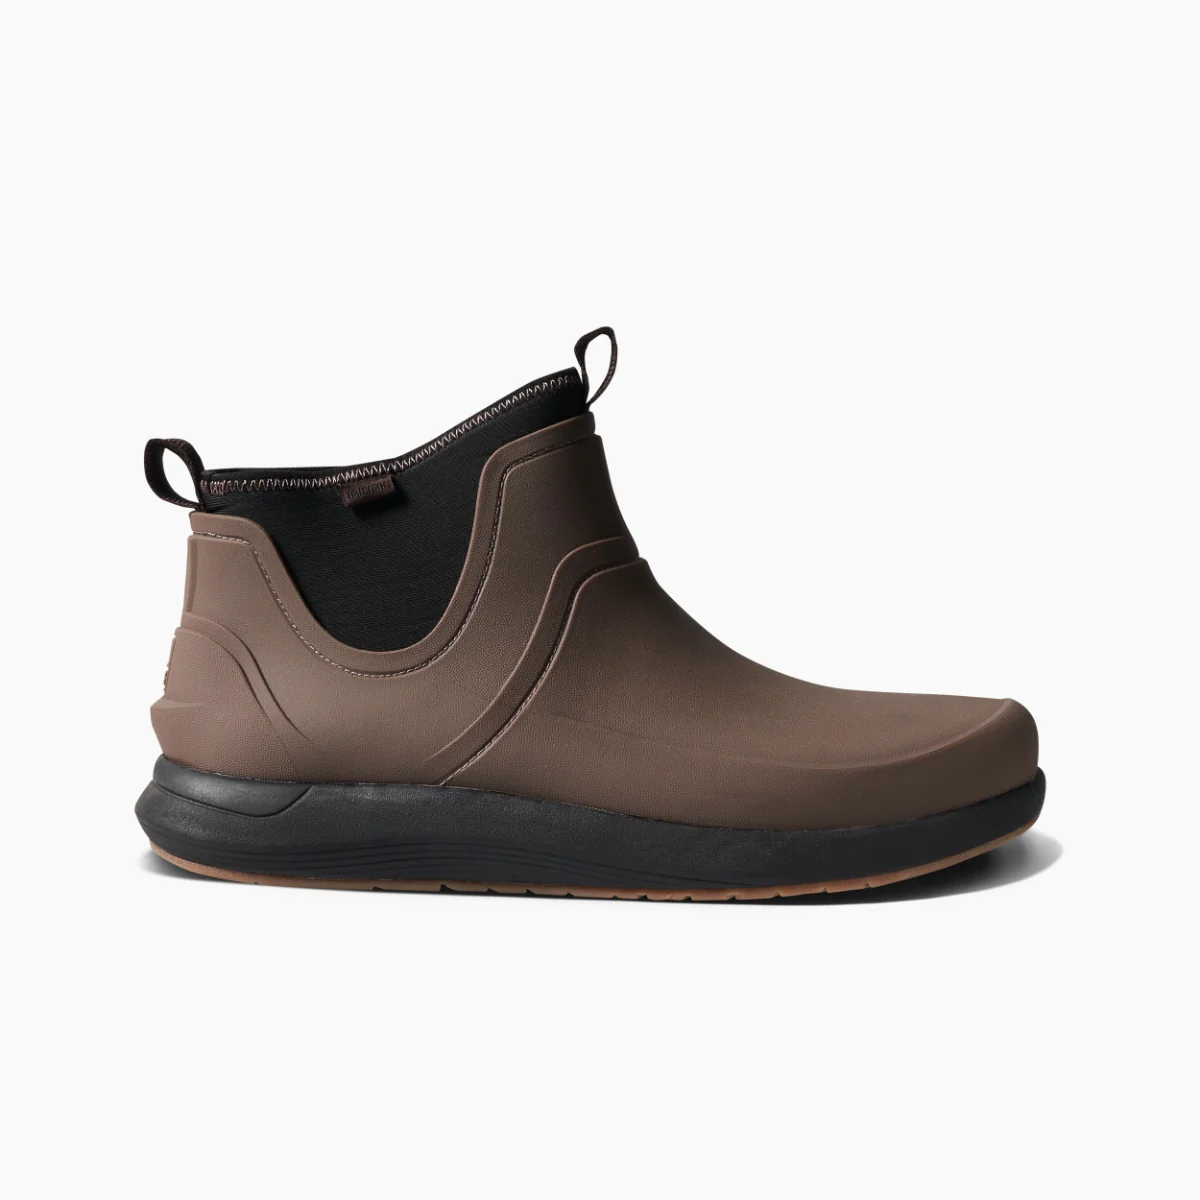 Men's Swellsole Scallywag Boots in Brown/Black side view